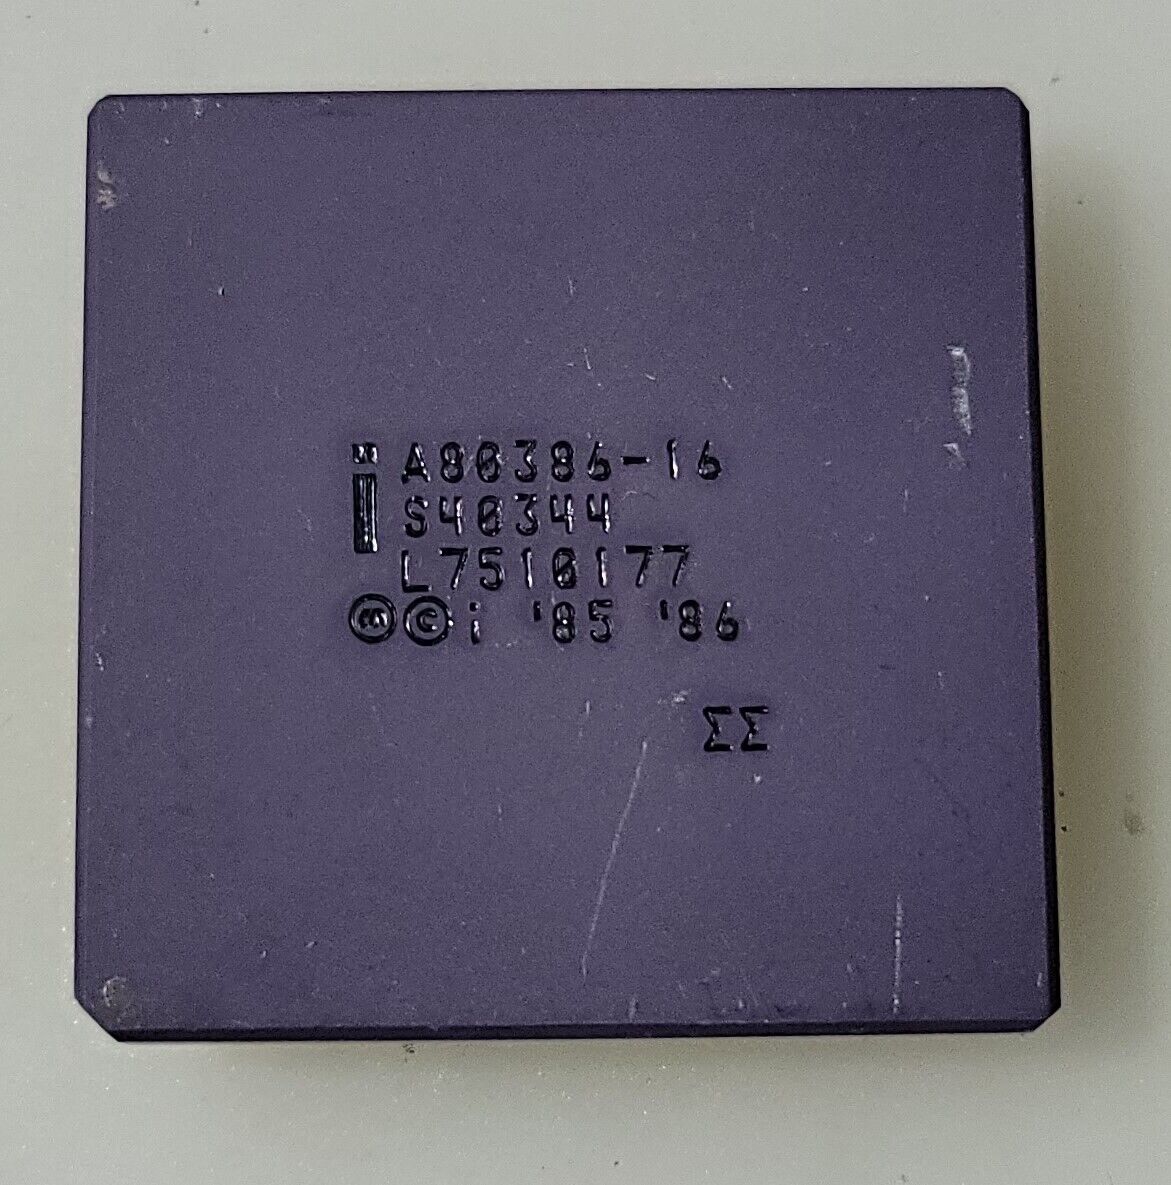 Vintage Rare Intel A80386-16 Ceramic Processor 1985 Collection or Gold Recovery